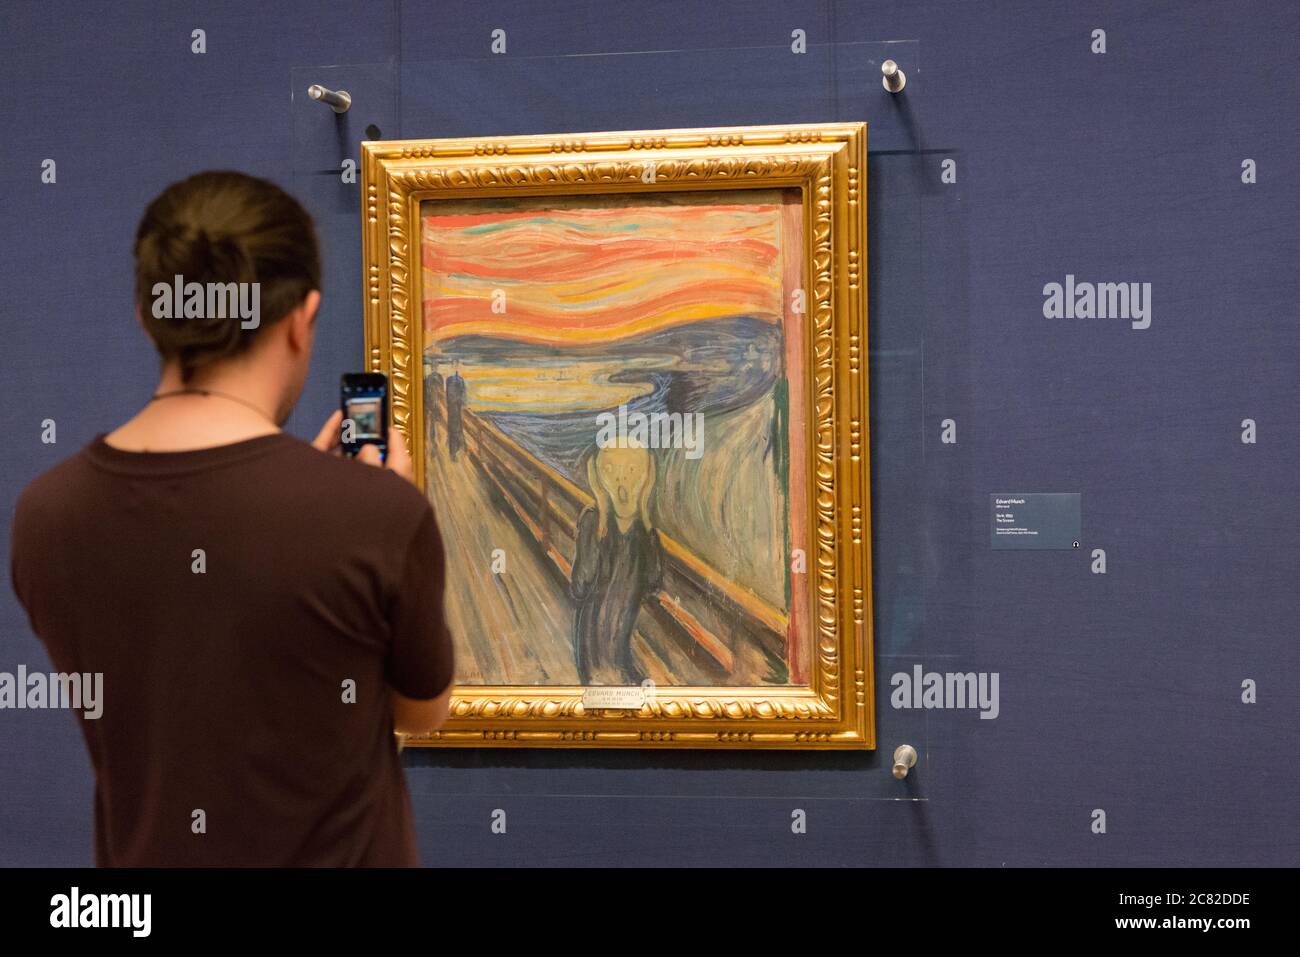 Edvard Munch's The Scream on display at the National Gallery in Oslo, Norway Stock Photo